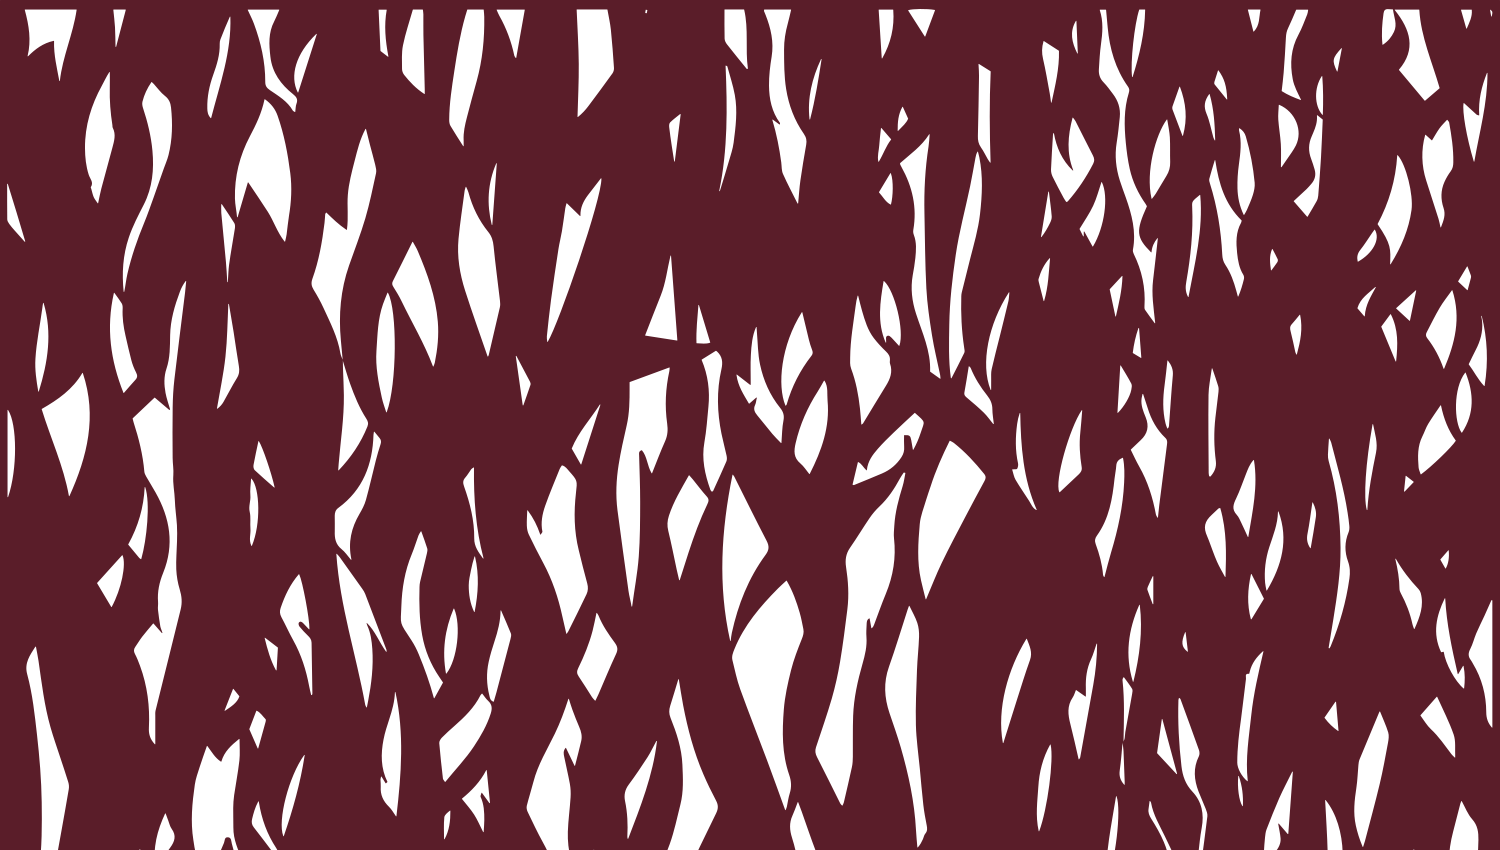 Parasoleil™ Passion Fruit© pattern displayed with a burgundy color overlay